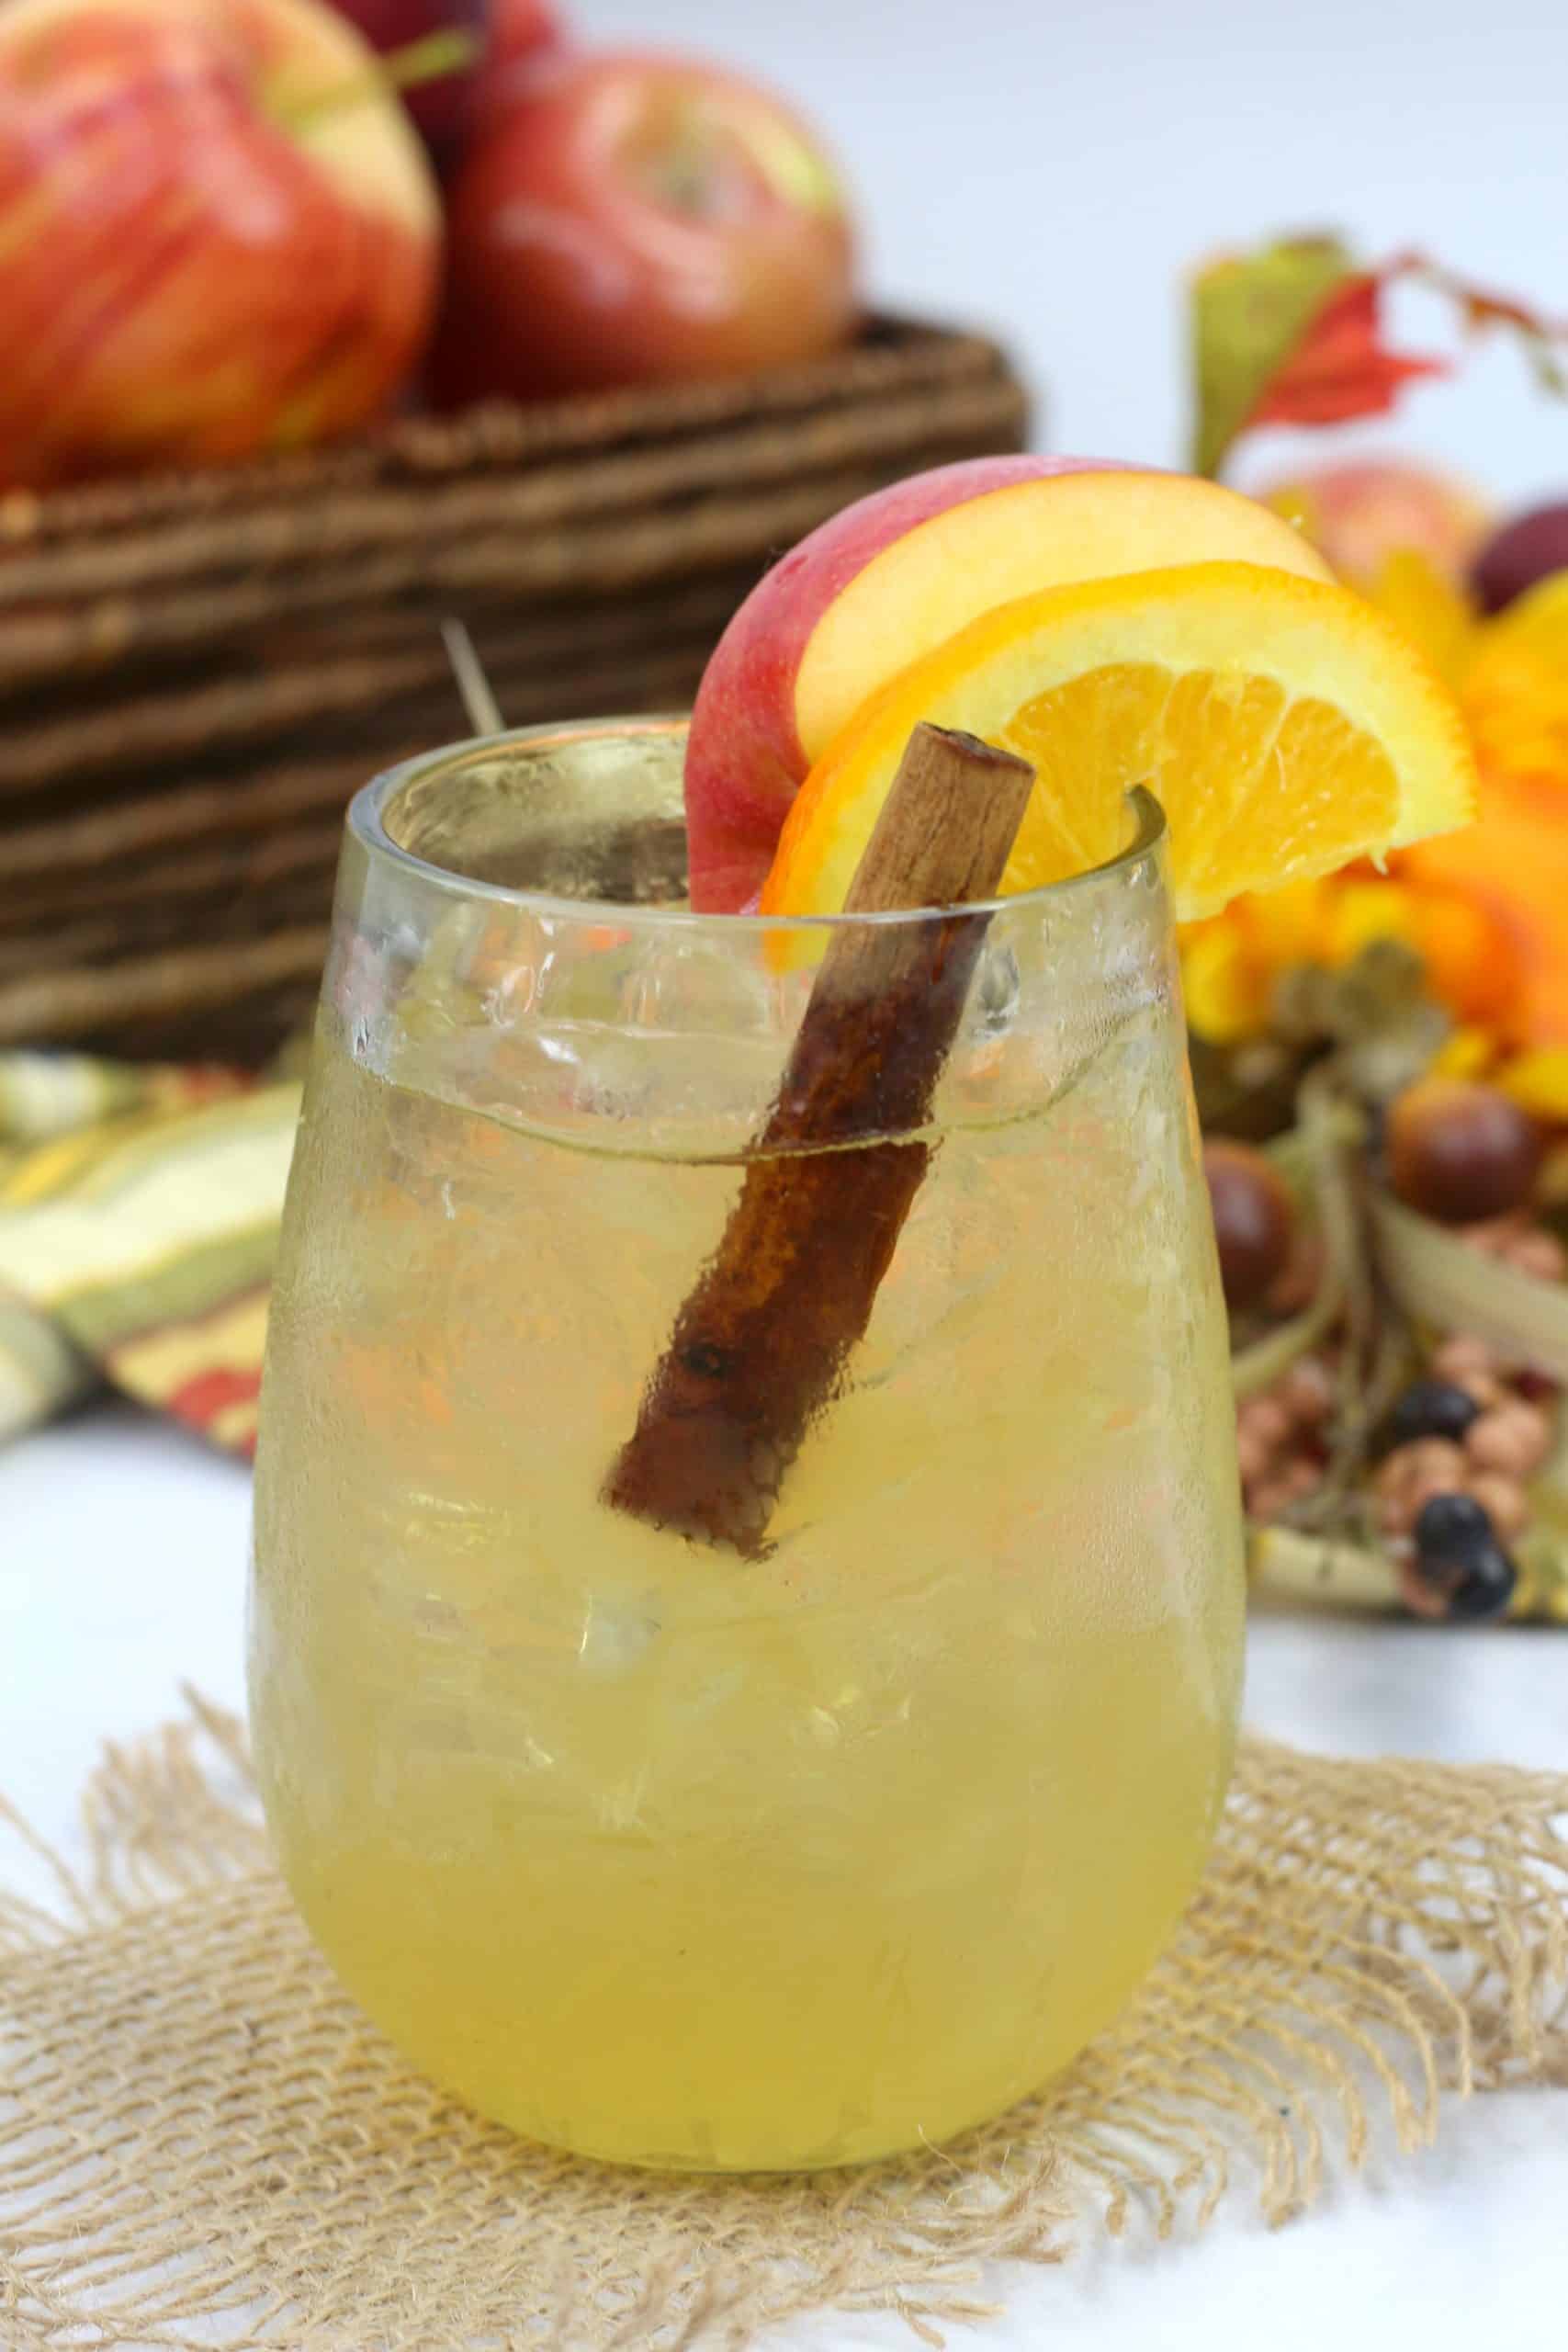 old fashioned apple cider in a clear glass